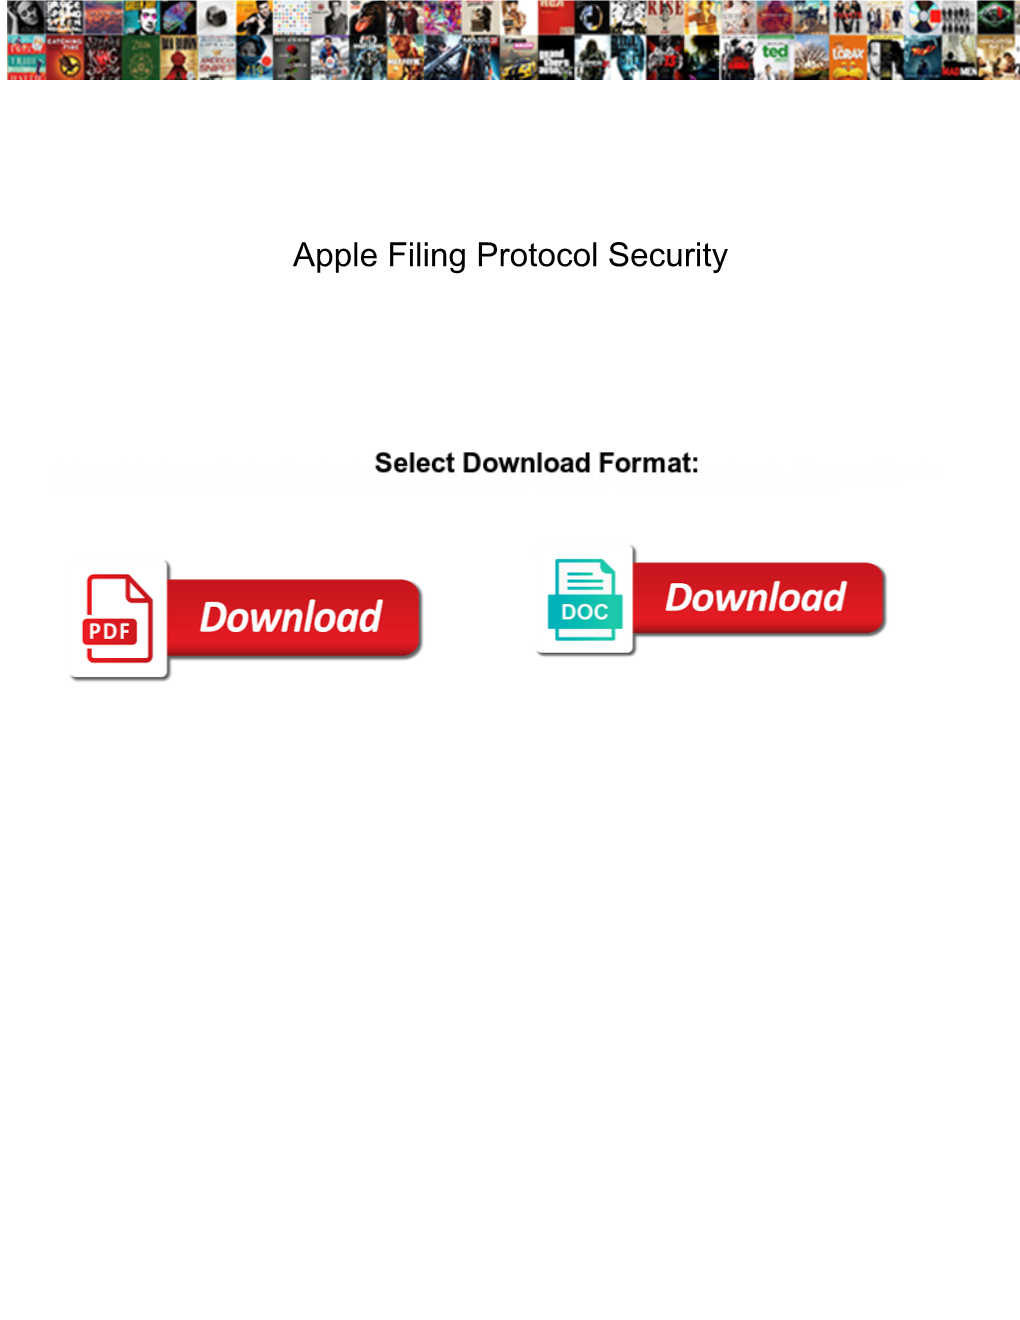 Apple Filing Protocol Security